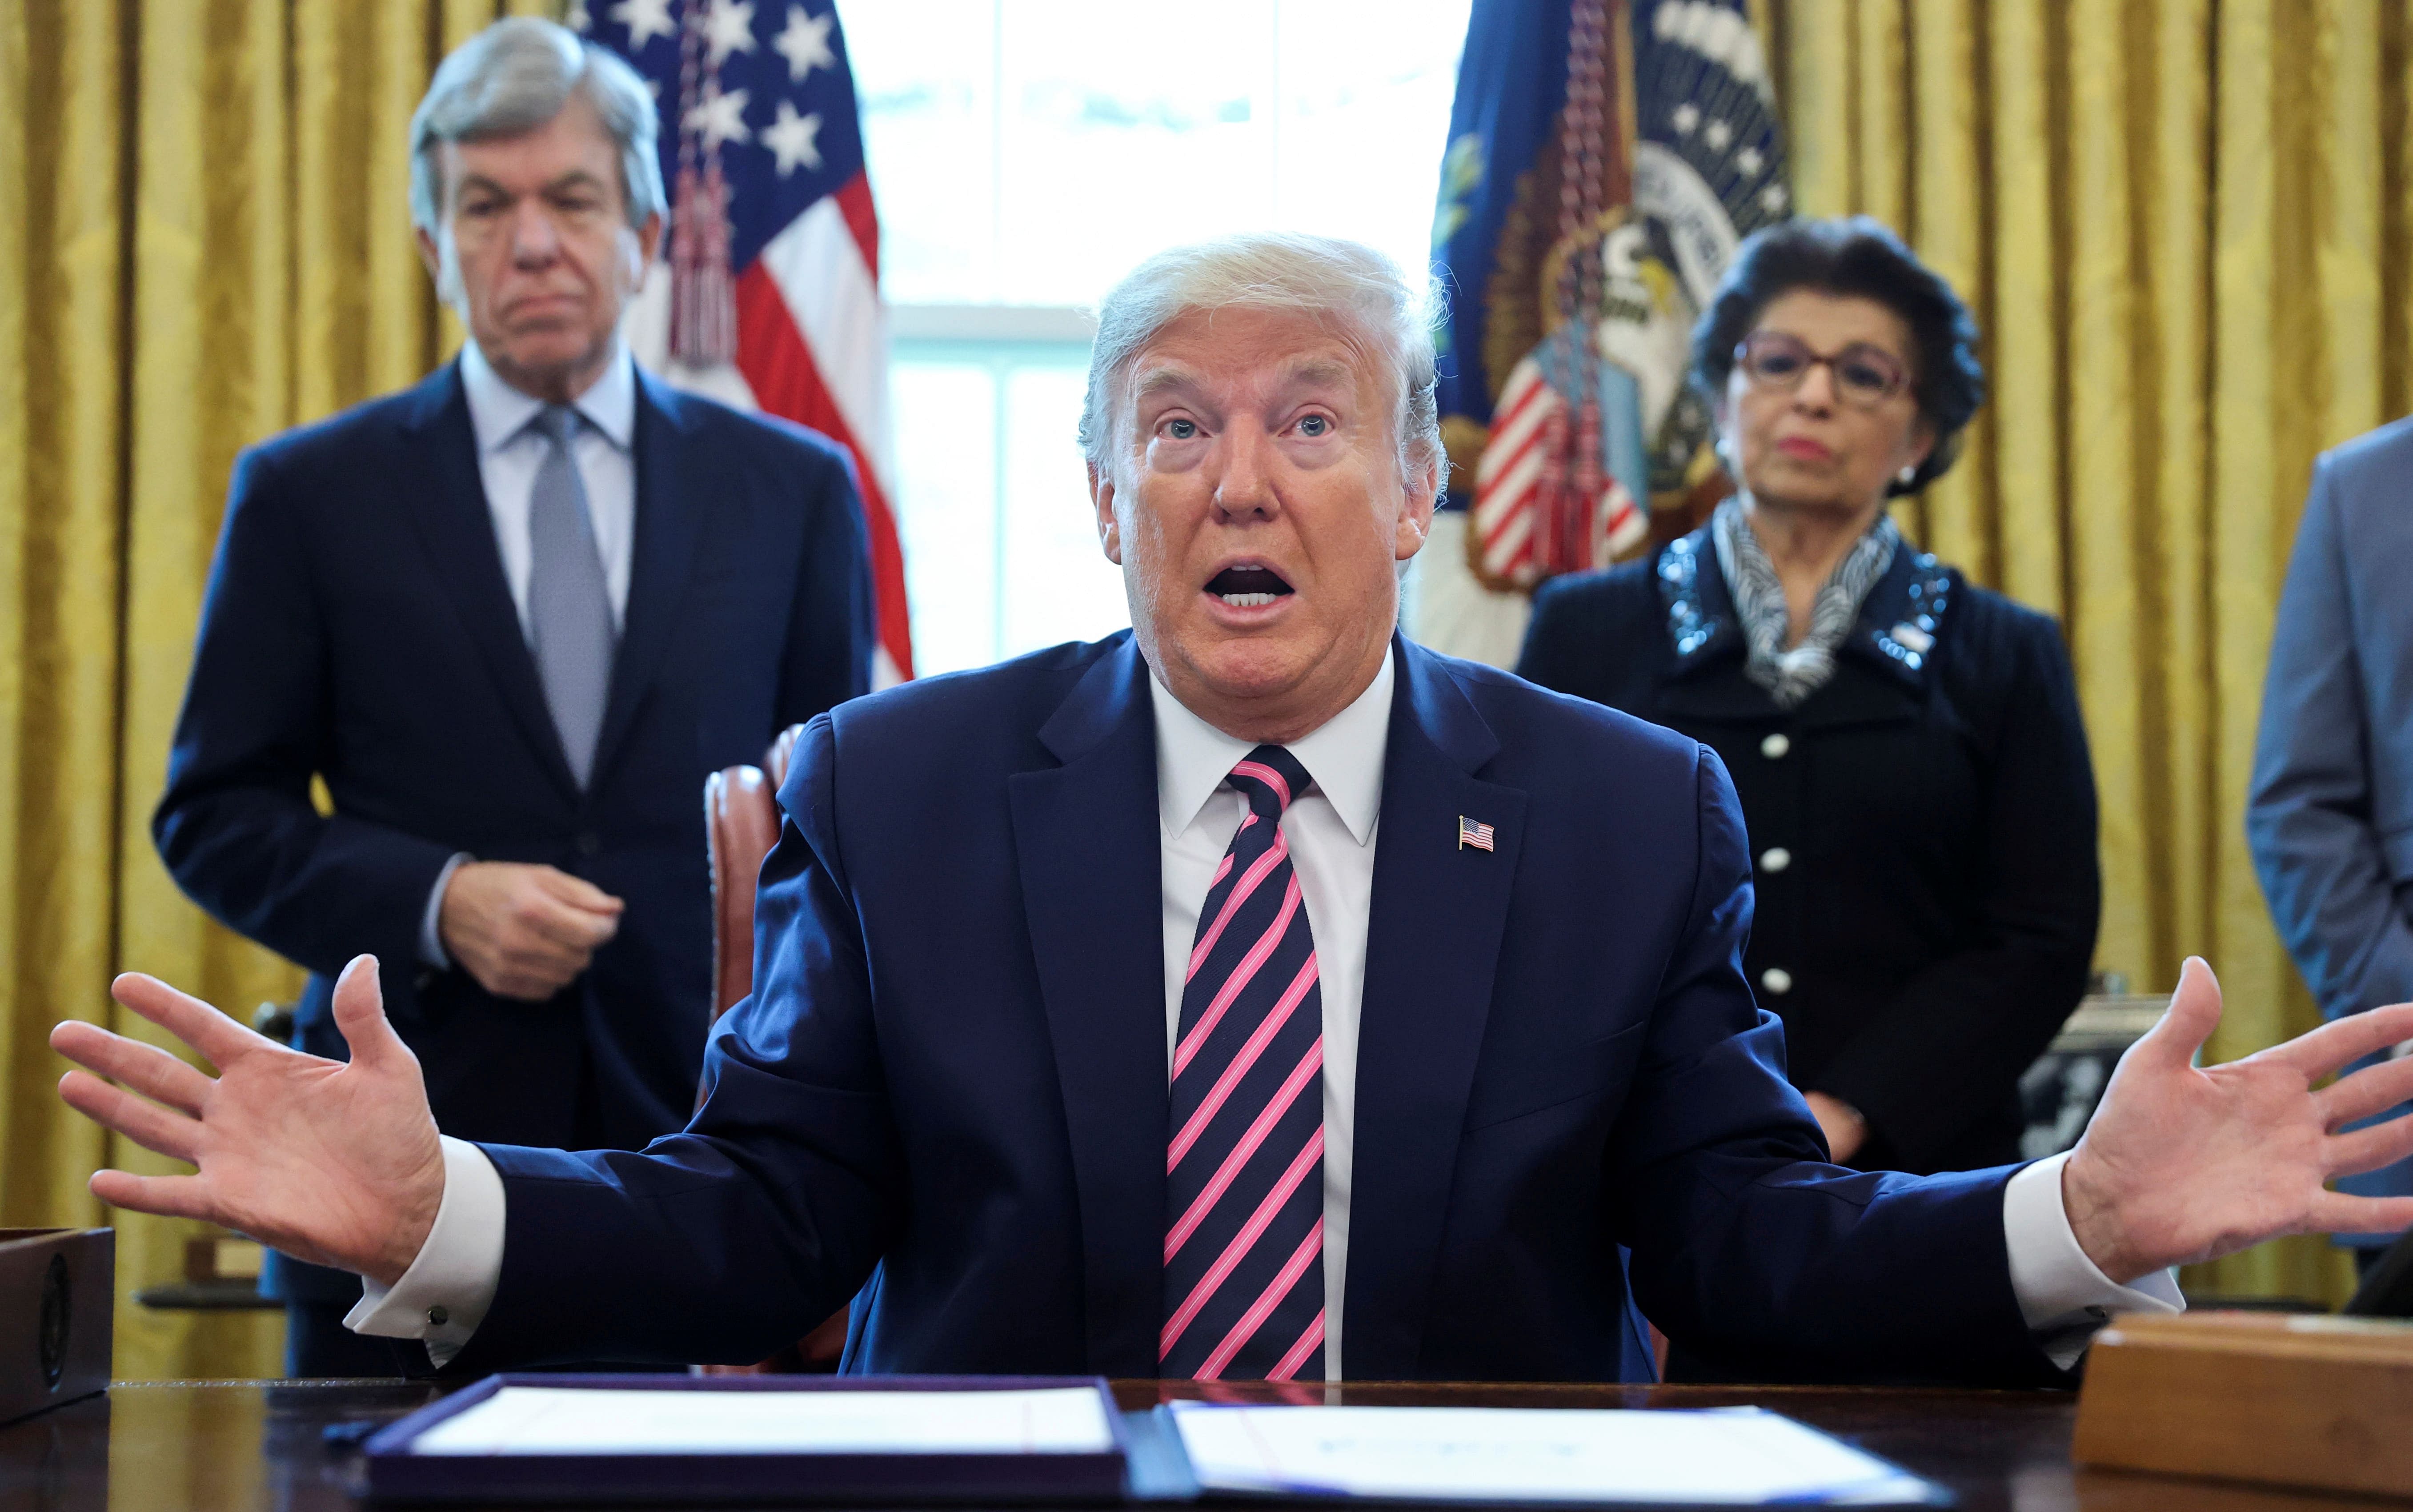 In a conference call with governors Monday quickly leaked to media outlets, Trump told state leaders they were "going to look like a bunch of jerks" if they were too soft. (Credit: Reuters Photo)